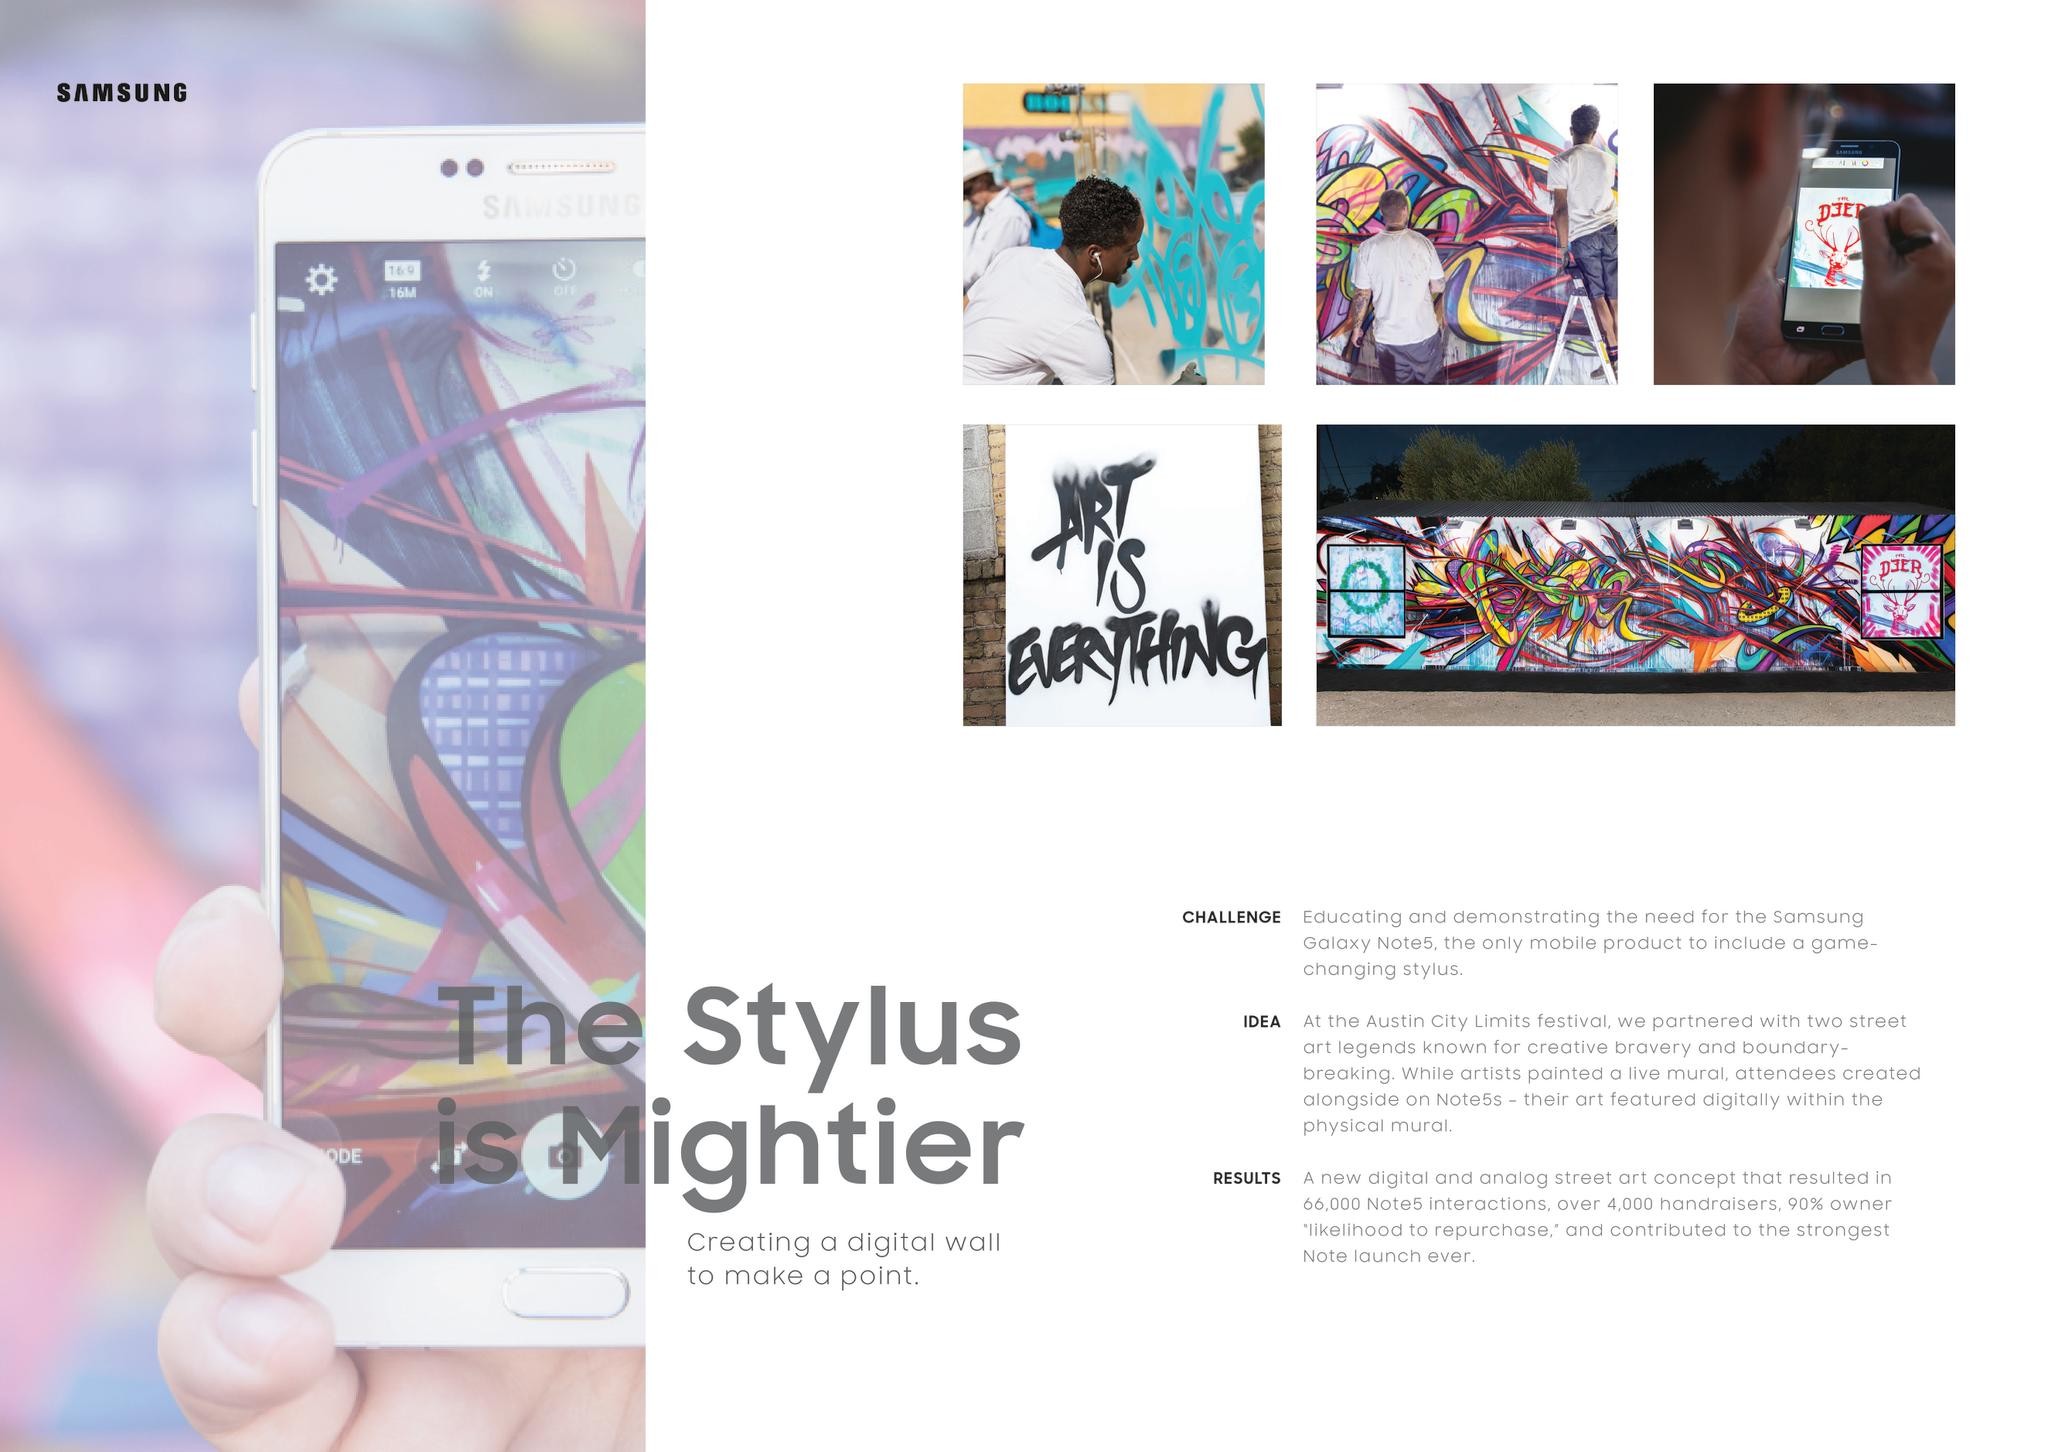 The Stylus Is Mightier 2015